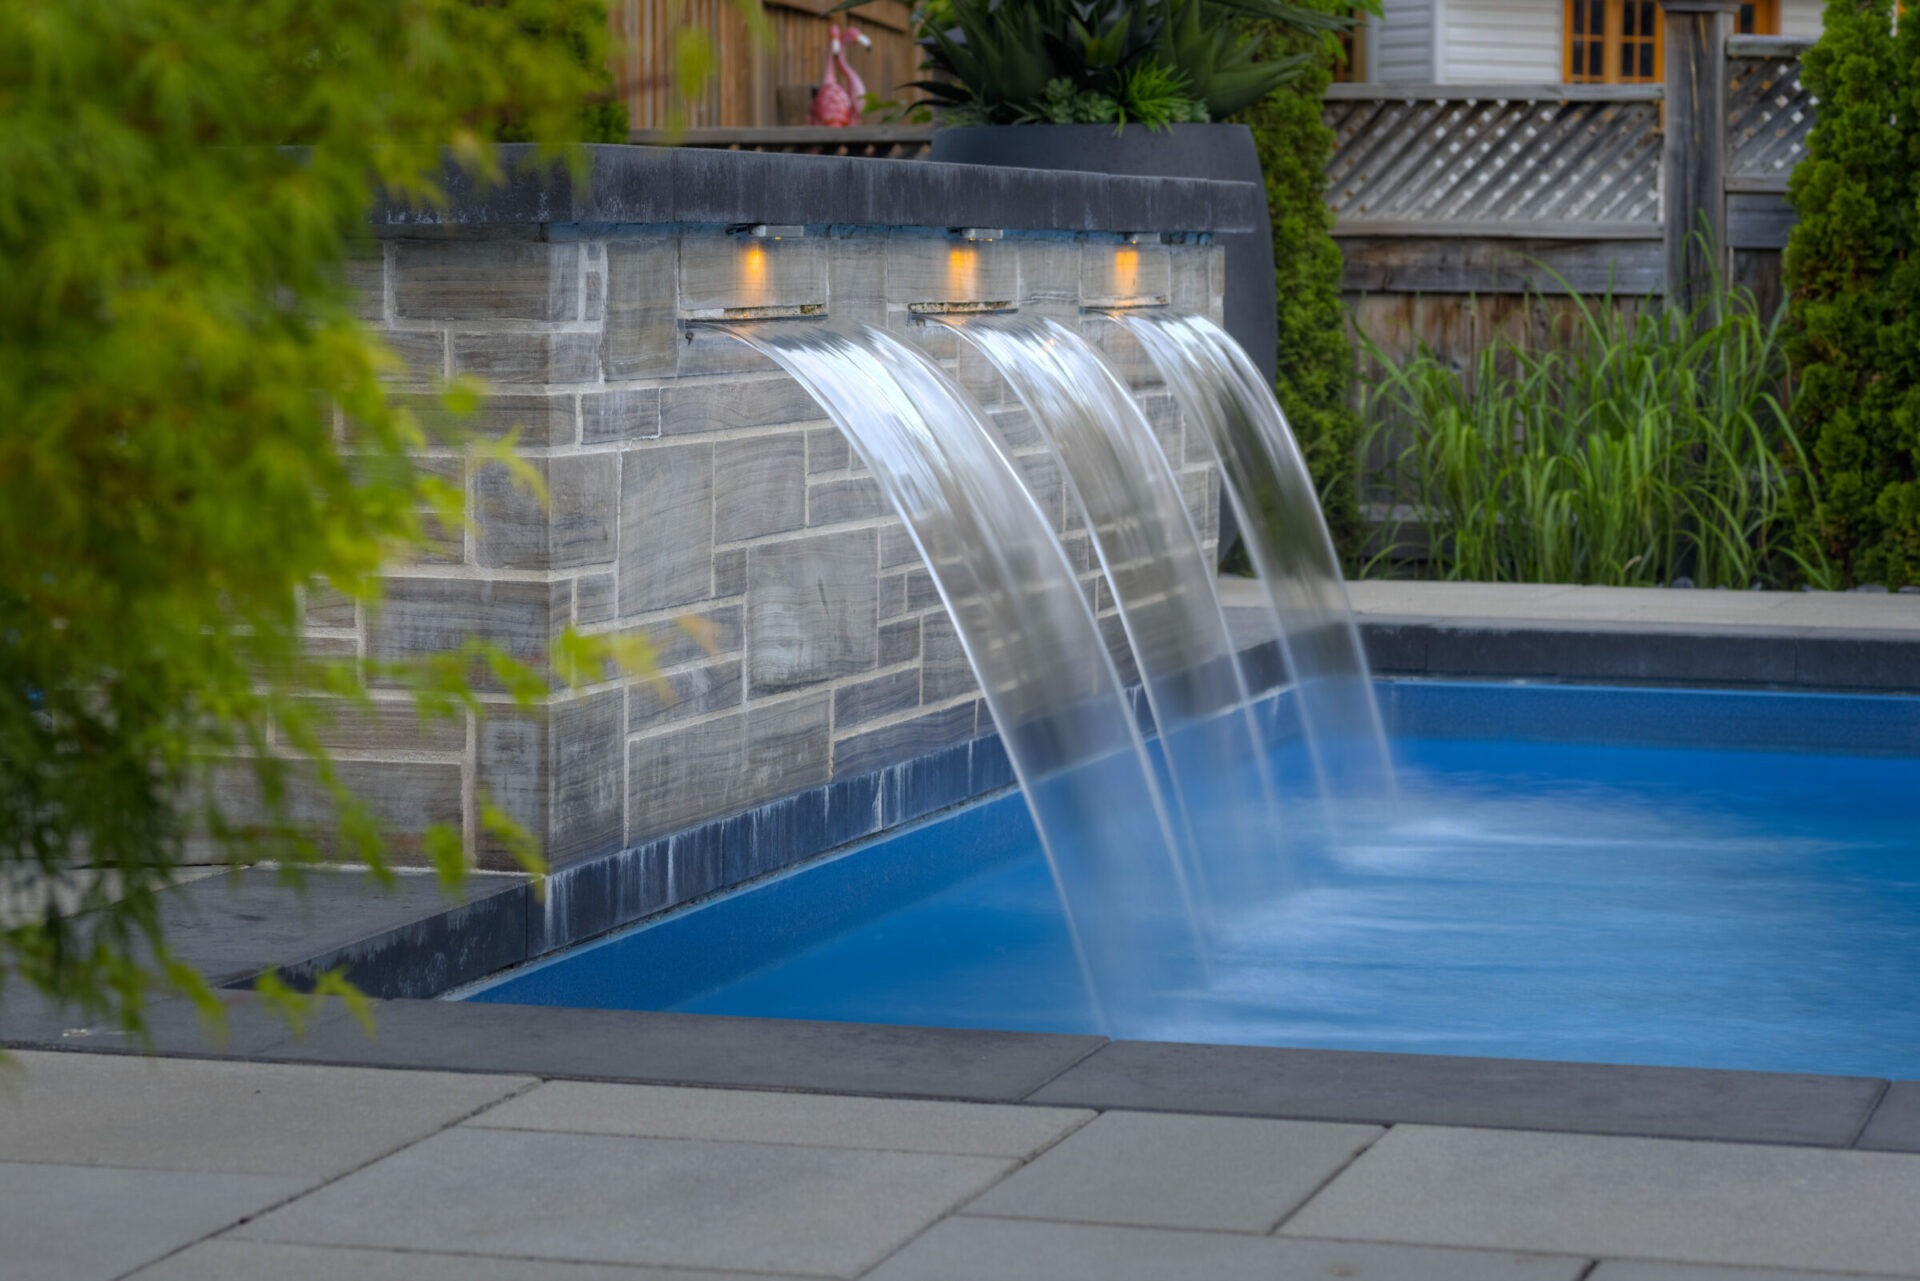 A serene backyard with a swimming pool featuring an elegant waterfall. Smooth jets of water flow under warm lighting against a stone wall backdrop.